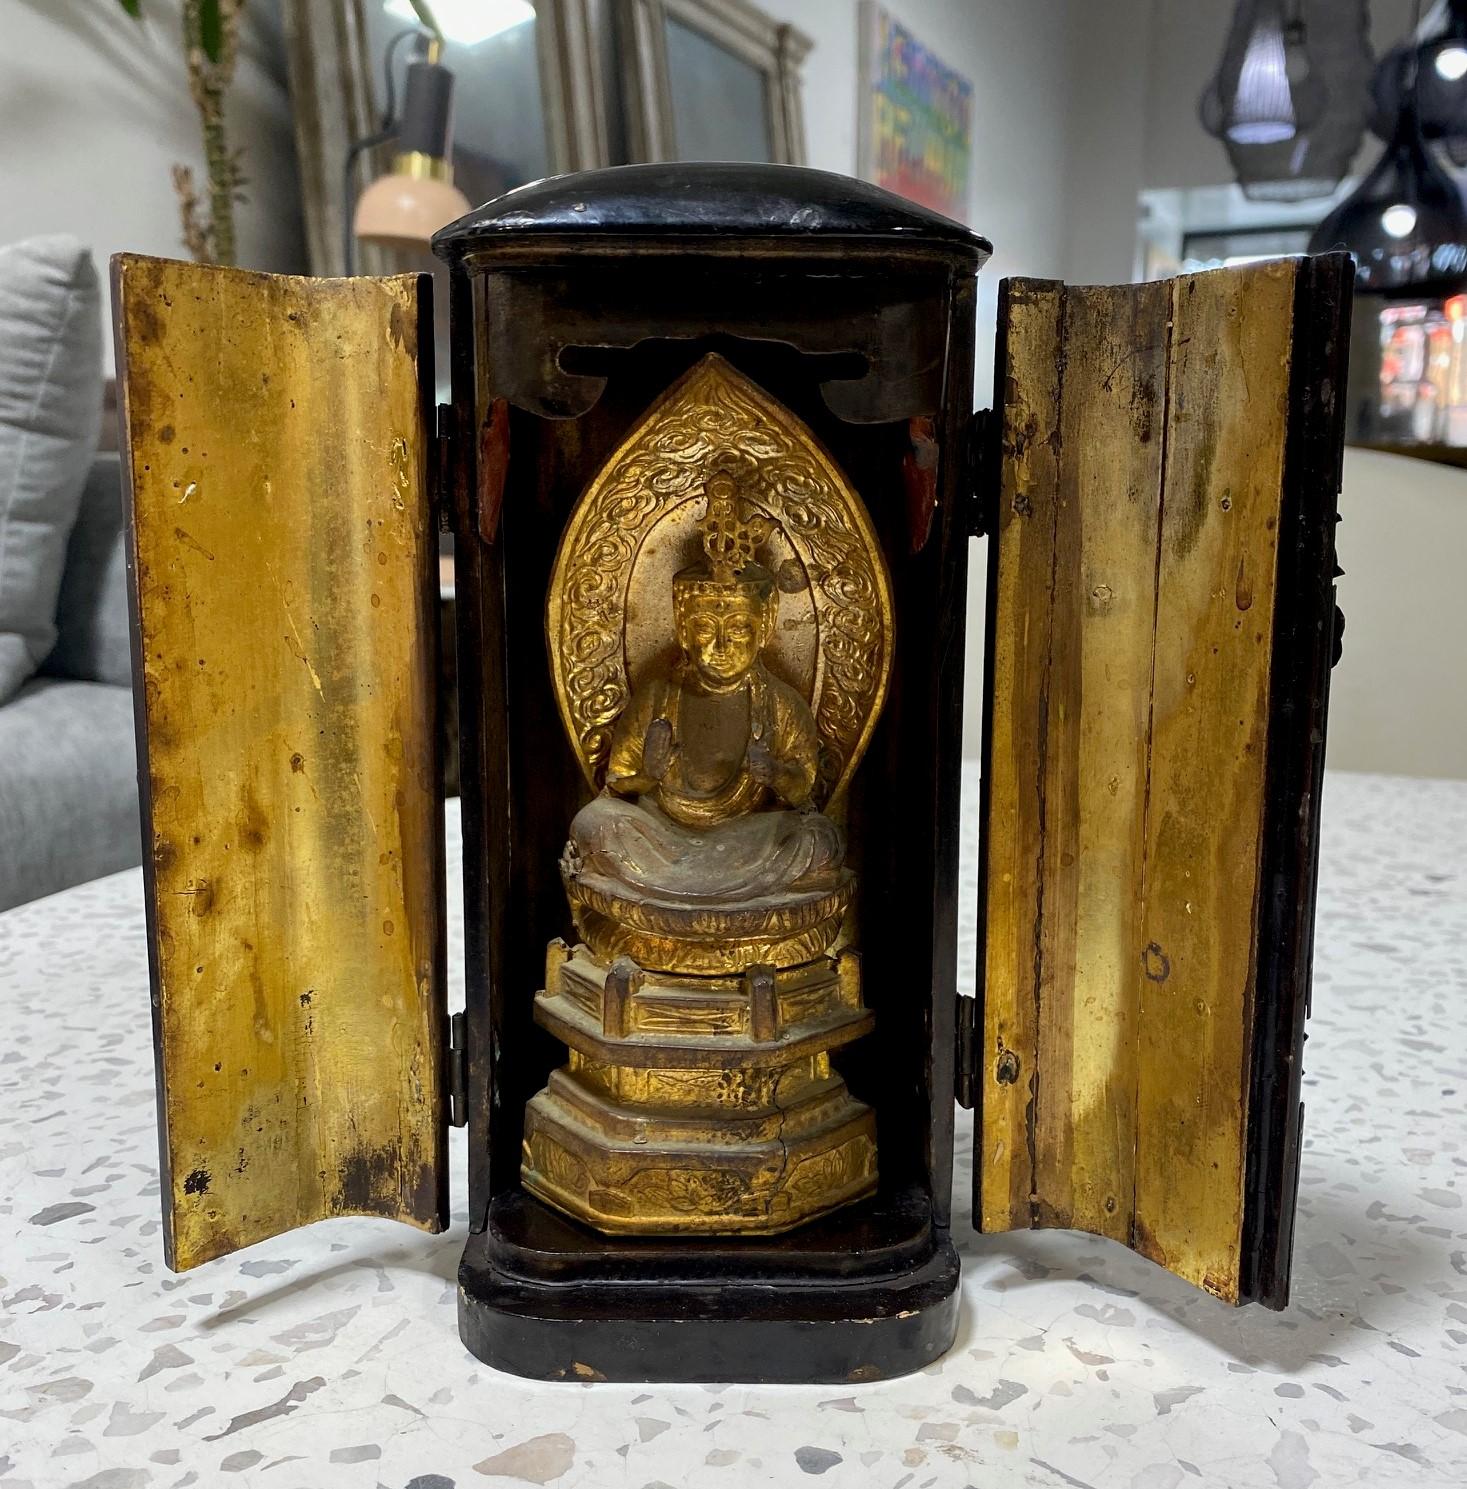 A wonderful Japanese Buddhist portable traveling zushi shrine altar with Amida Buddha (Amitabha) concealed inside the folded wood doors. 

This work dates back to the late Meiji/ Early Showa period.

The zushi case is made of wood and lacquer